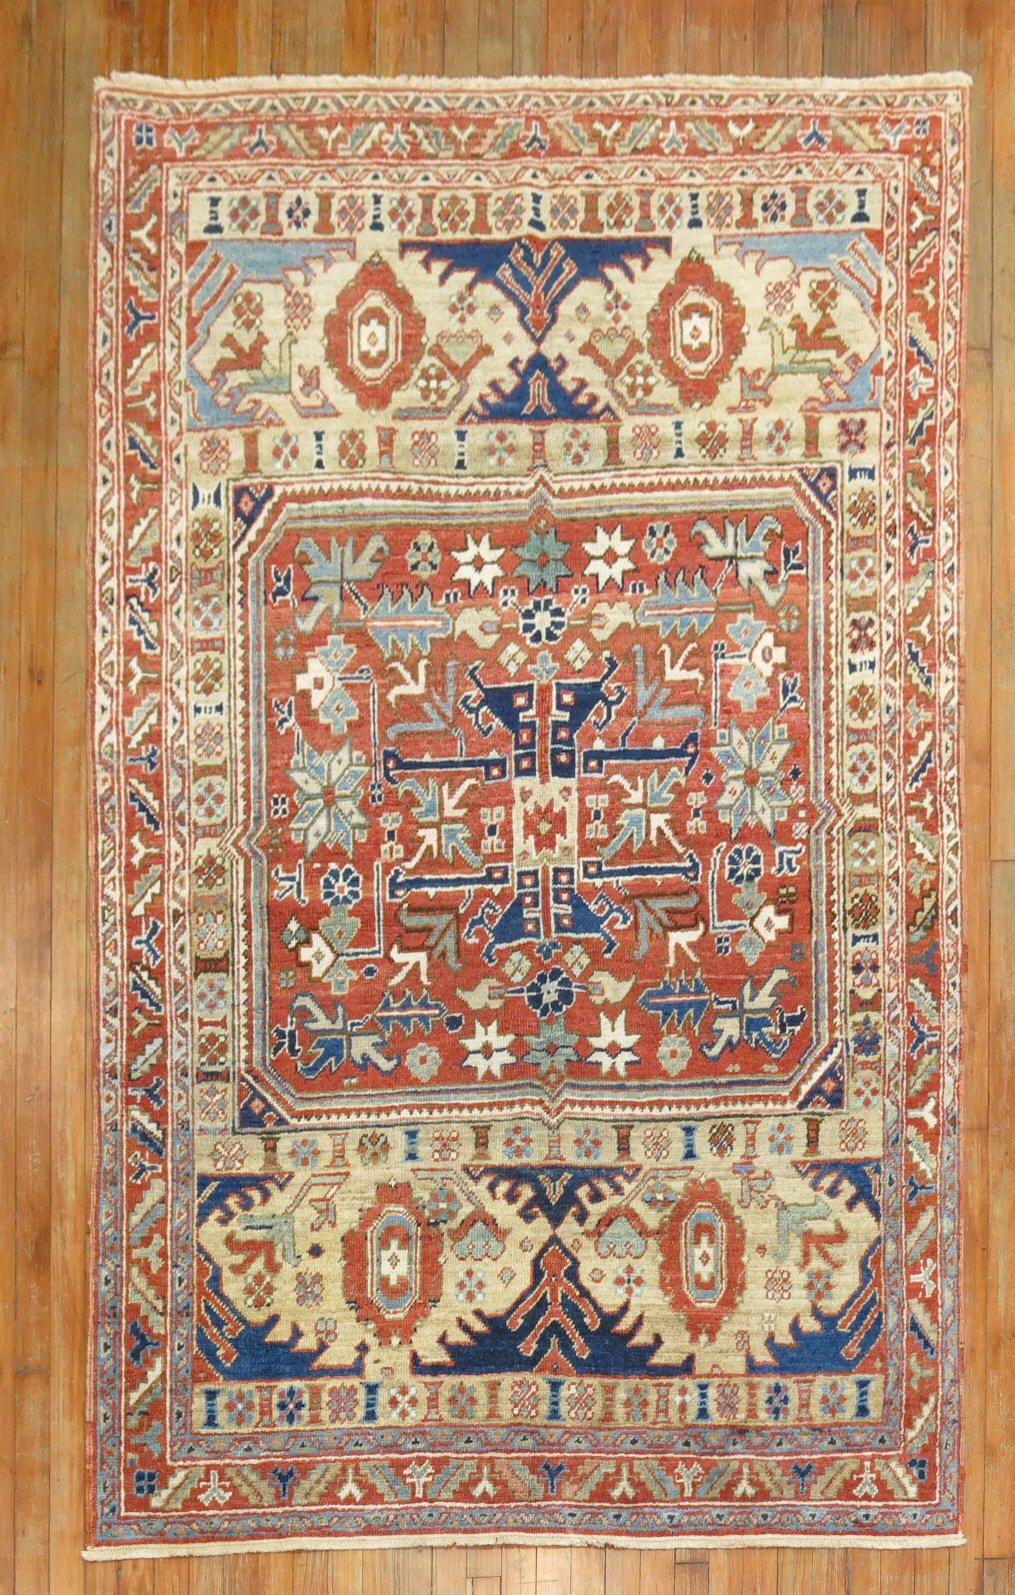 An early 20th century Heriz accent size rug with an unusual non-traditional design in rustic tones

Measures: 4'10'' x 7'1''.